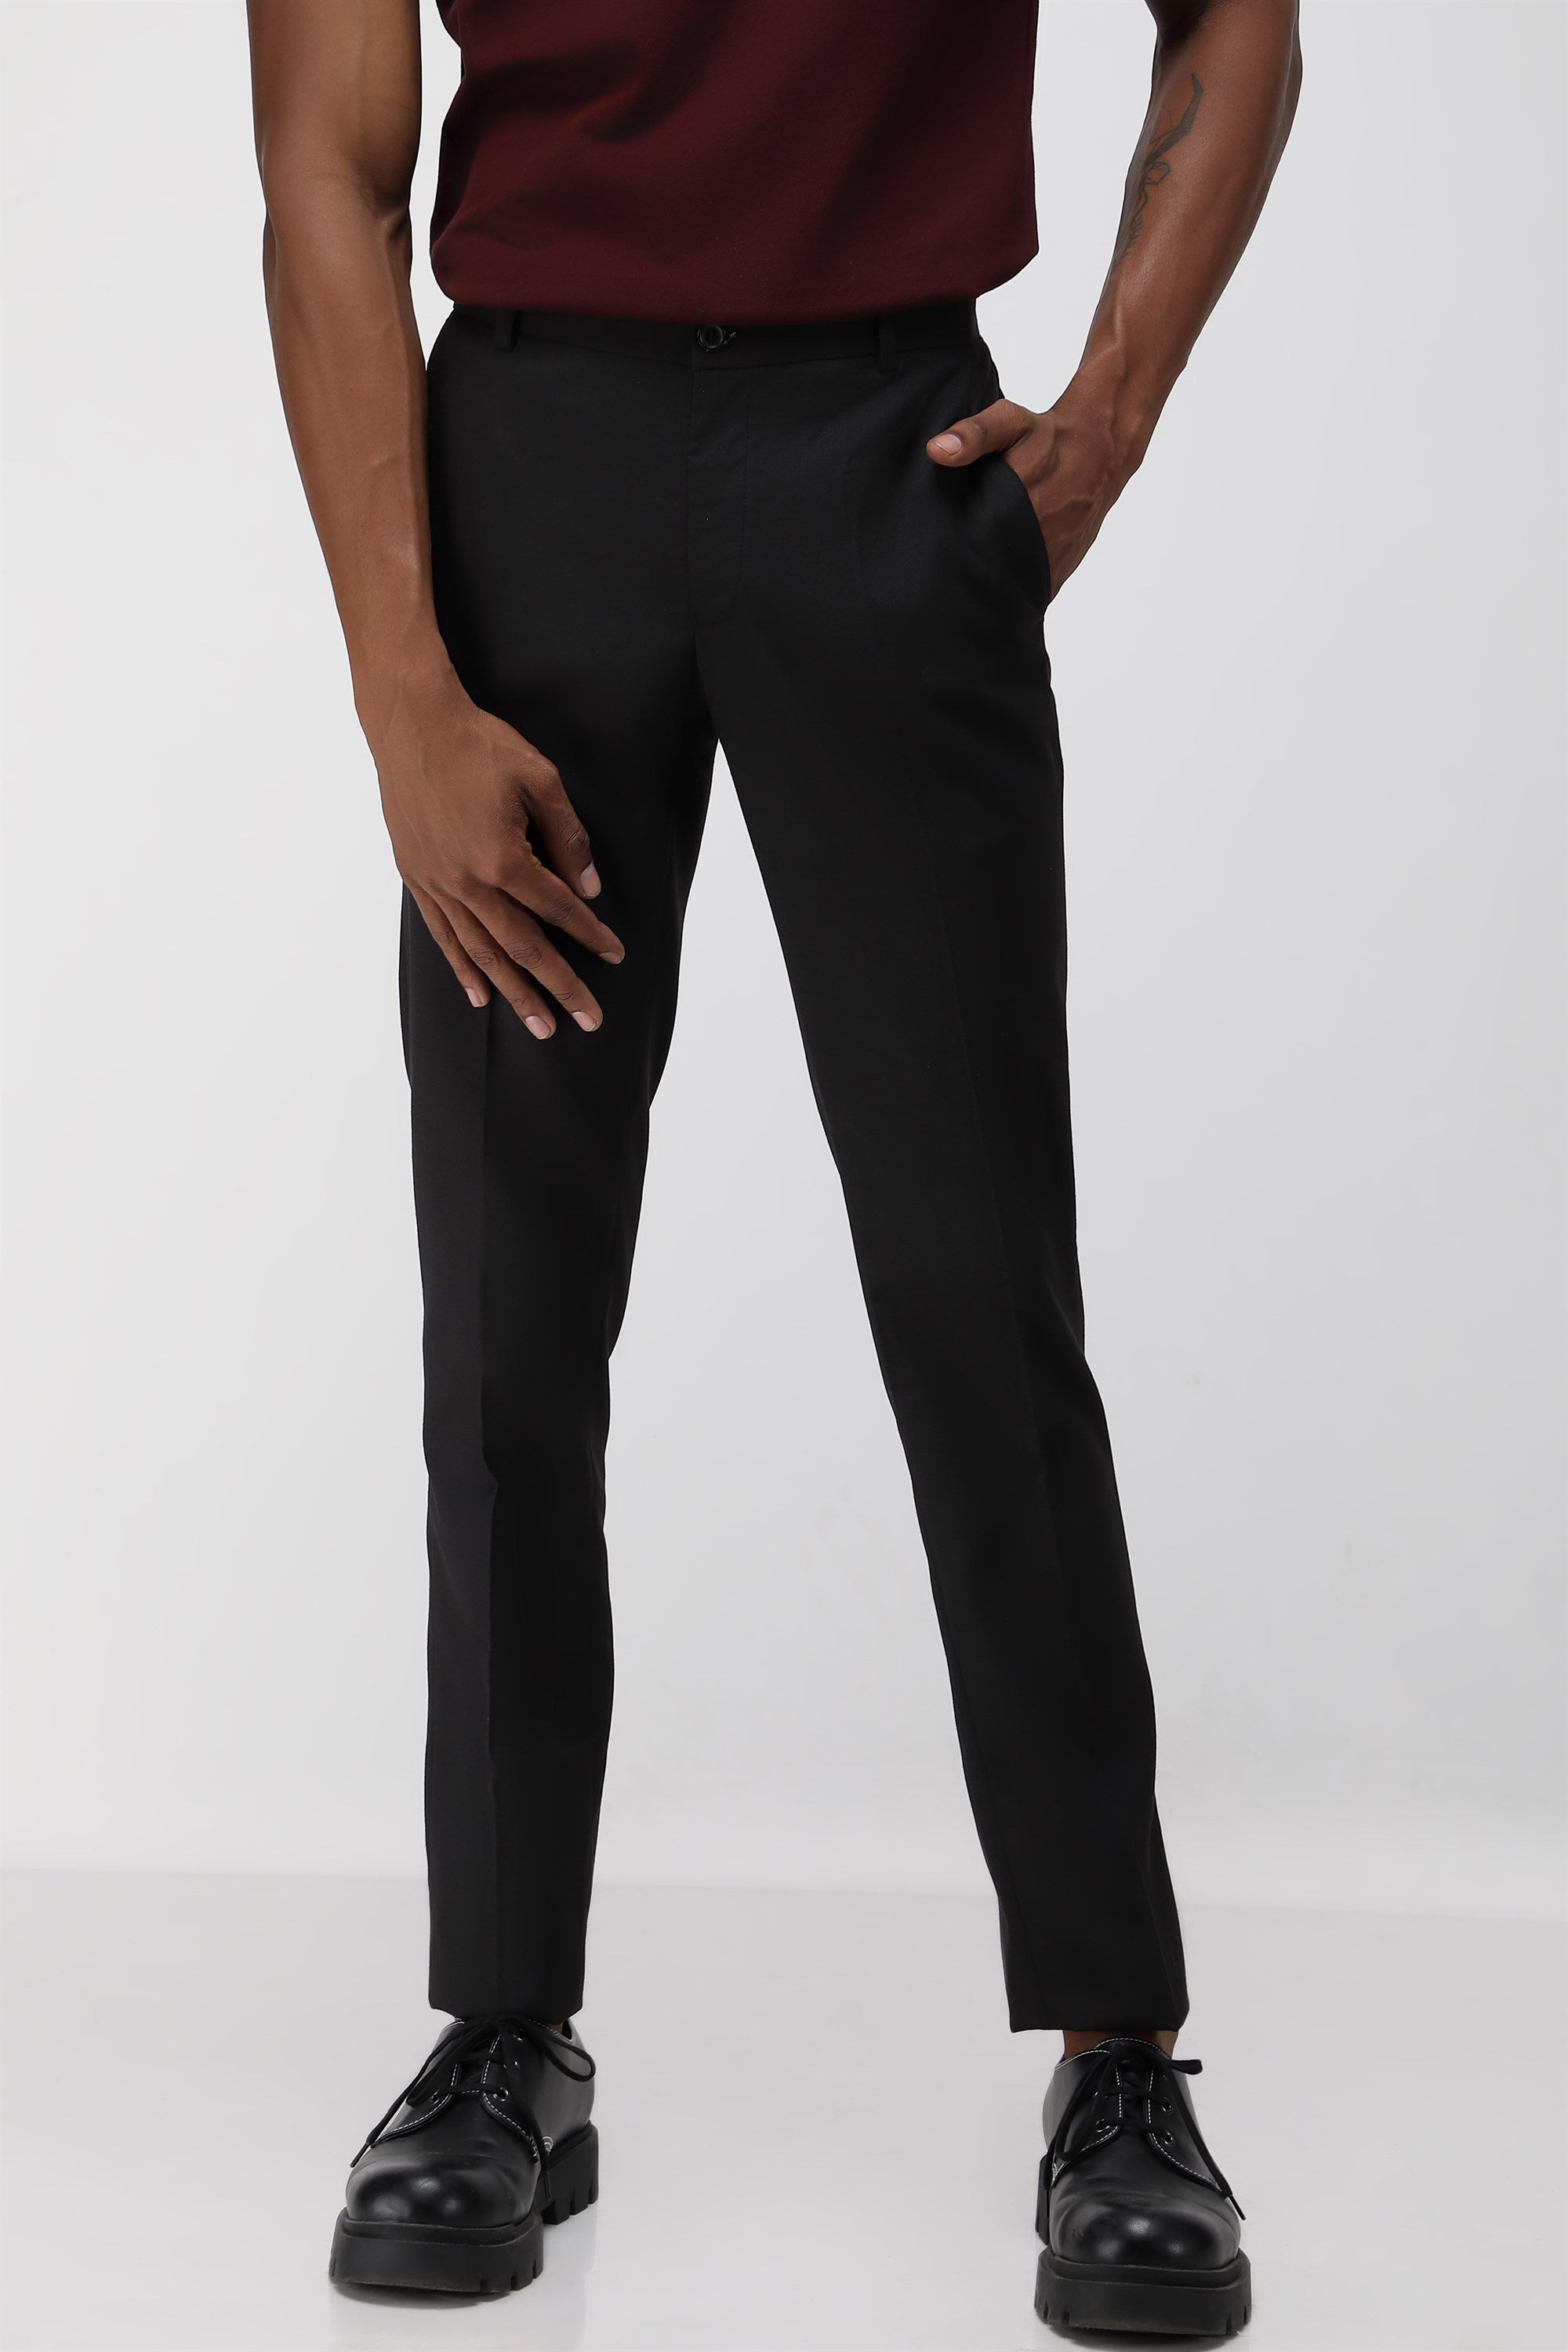 Buy Broadstar Women |Black |Wide Leg| Loose Fit |High-Rise |Fully  Stretchable| Comfort Fit|Formal Trousers at Amazon.in